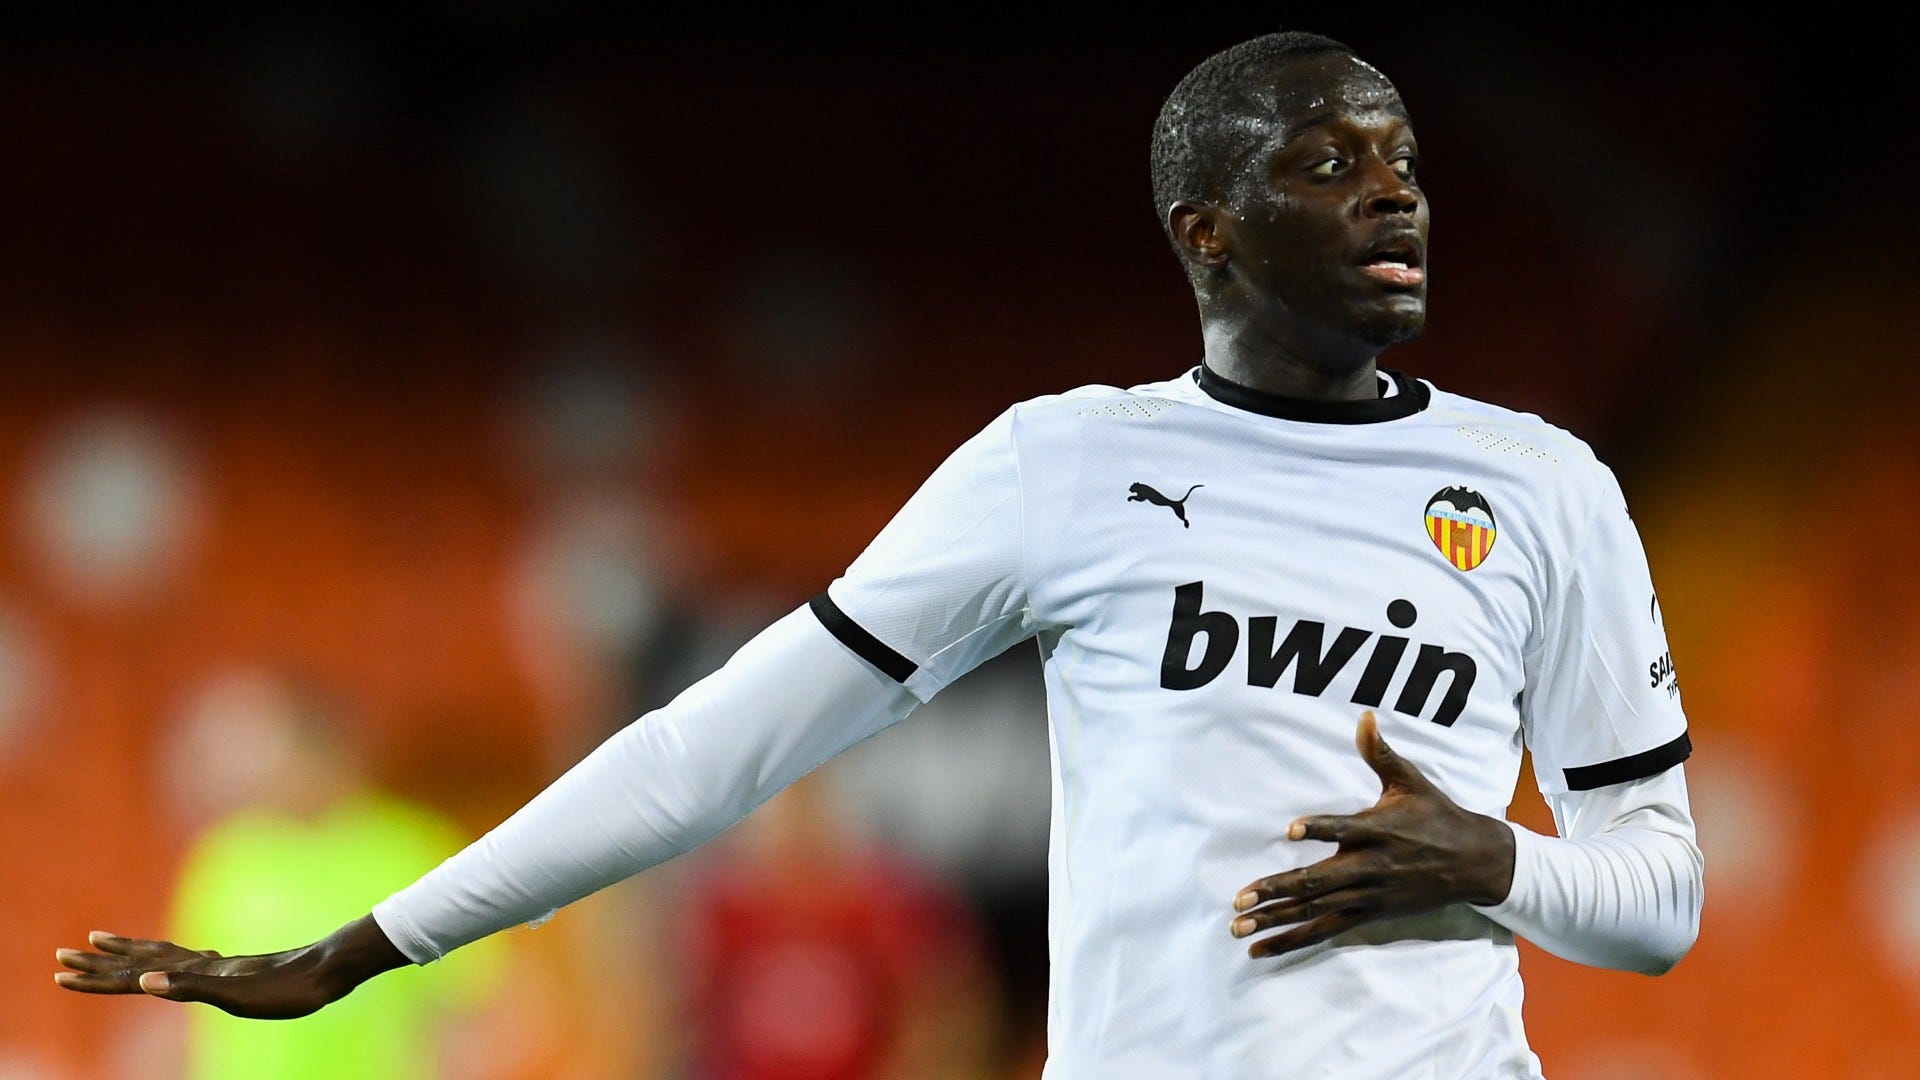 Valencia back Diakhaby after alleged racial abuse from Cadiz player leads to walk off - 'We support you Mouctar!' | Goal.com